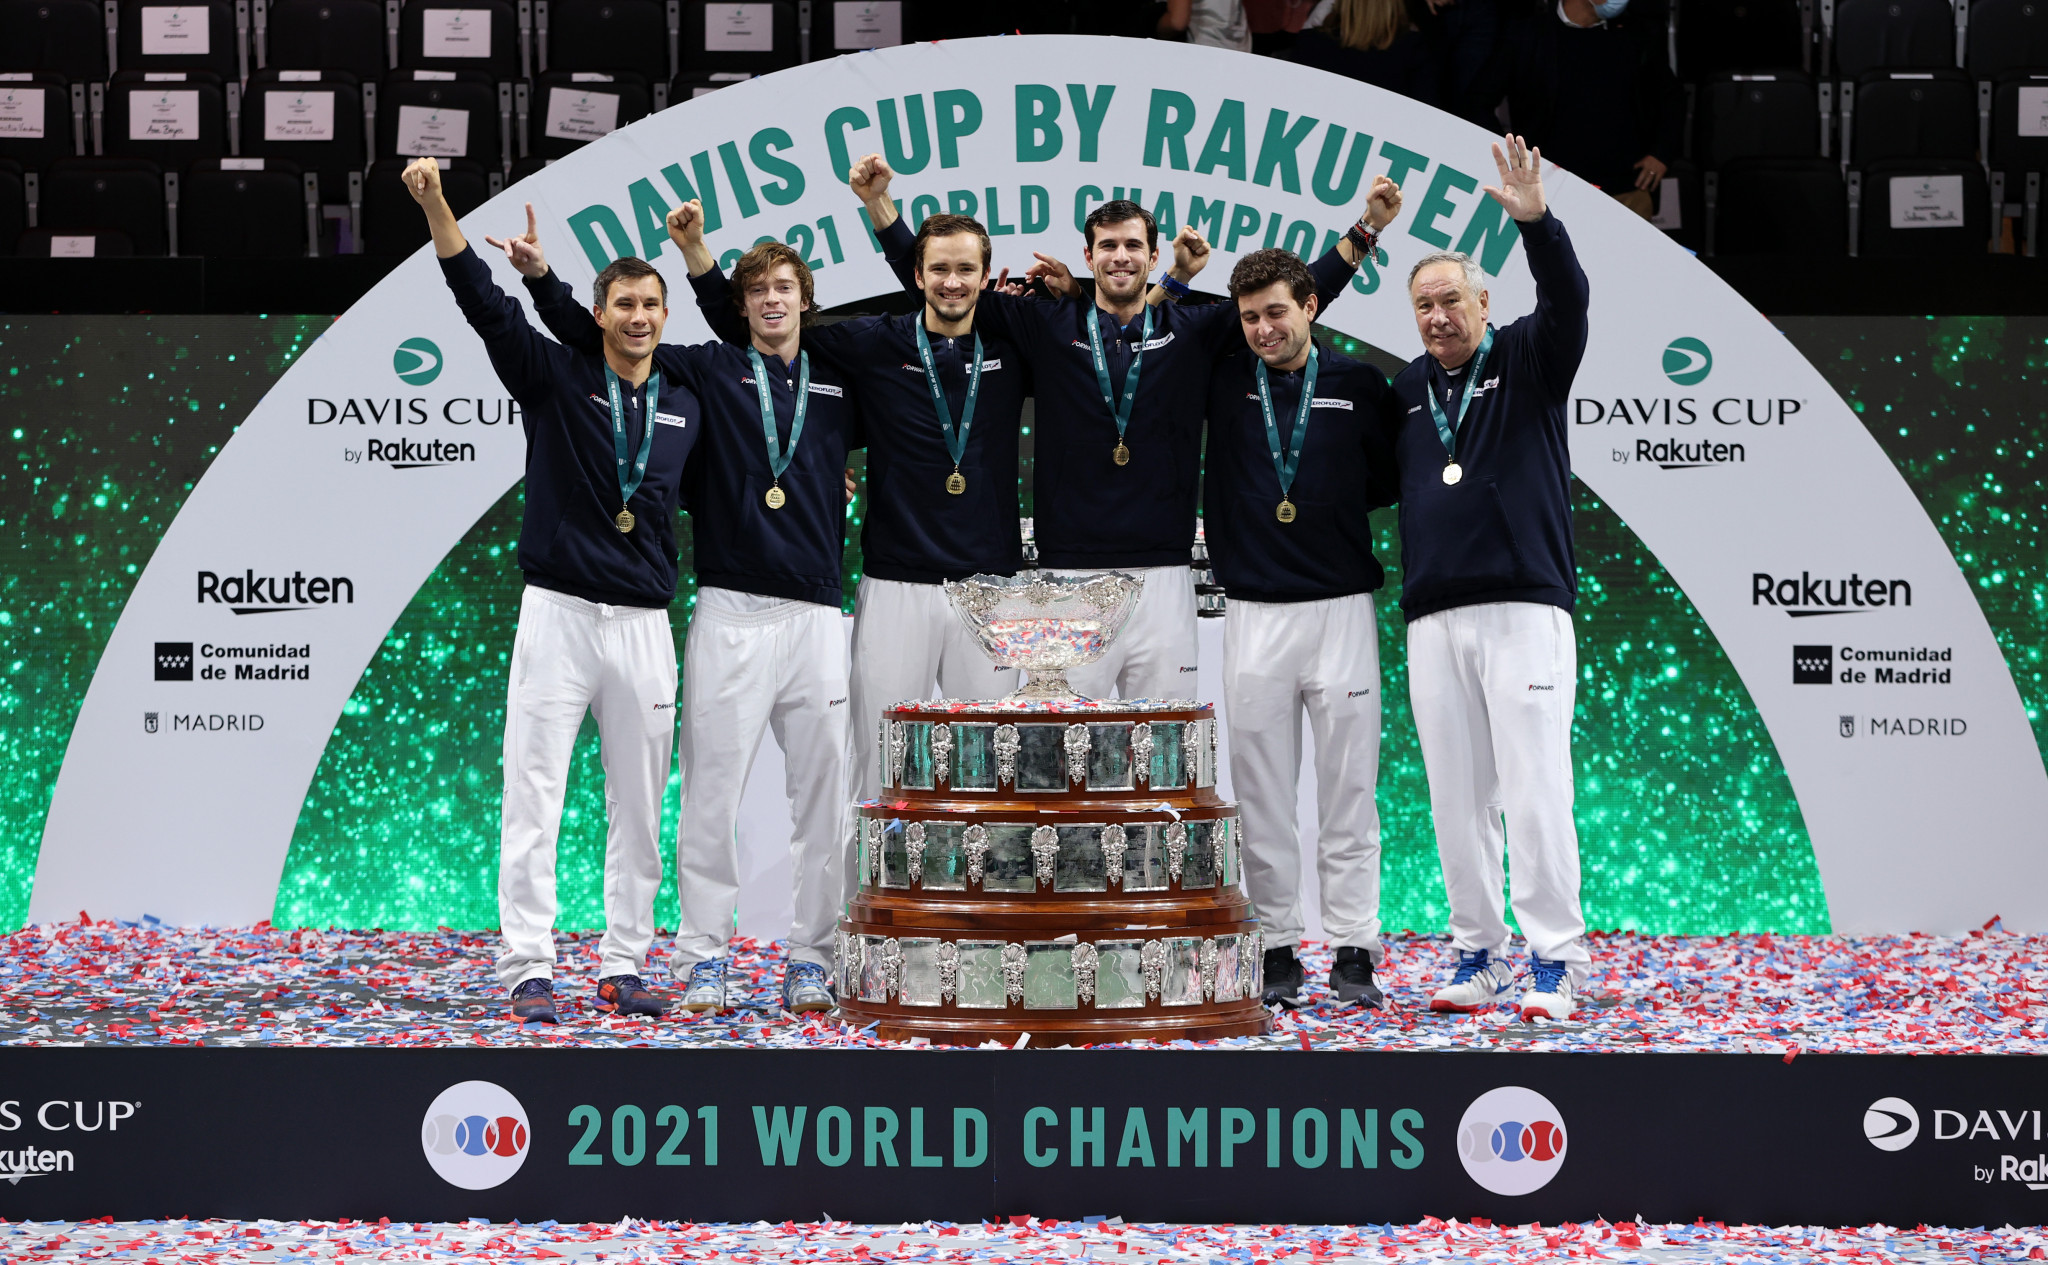 The Russian Tennis Federation won last season's Davis Cup Finals after beating Croatia ©Getty Images 